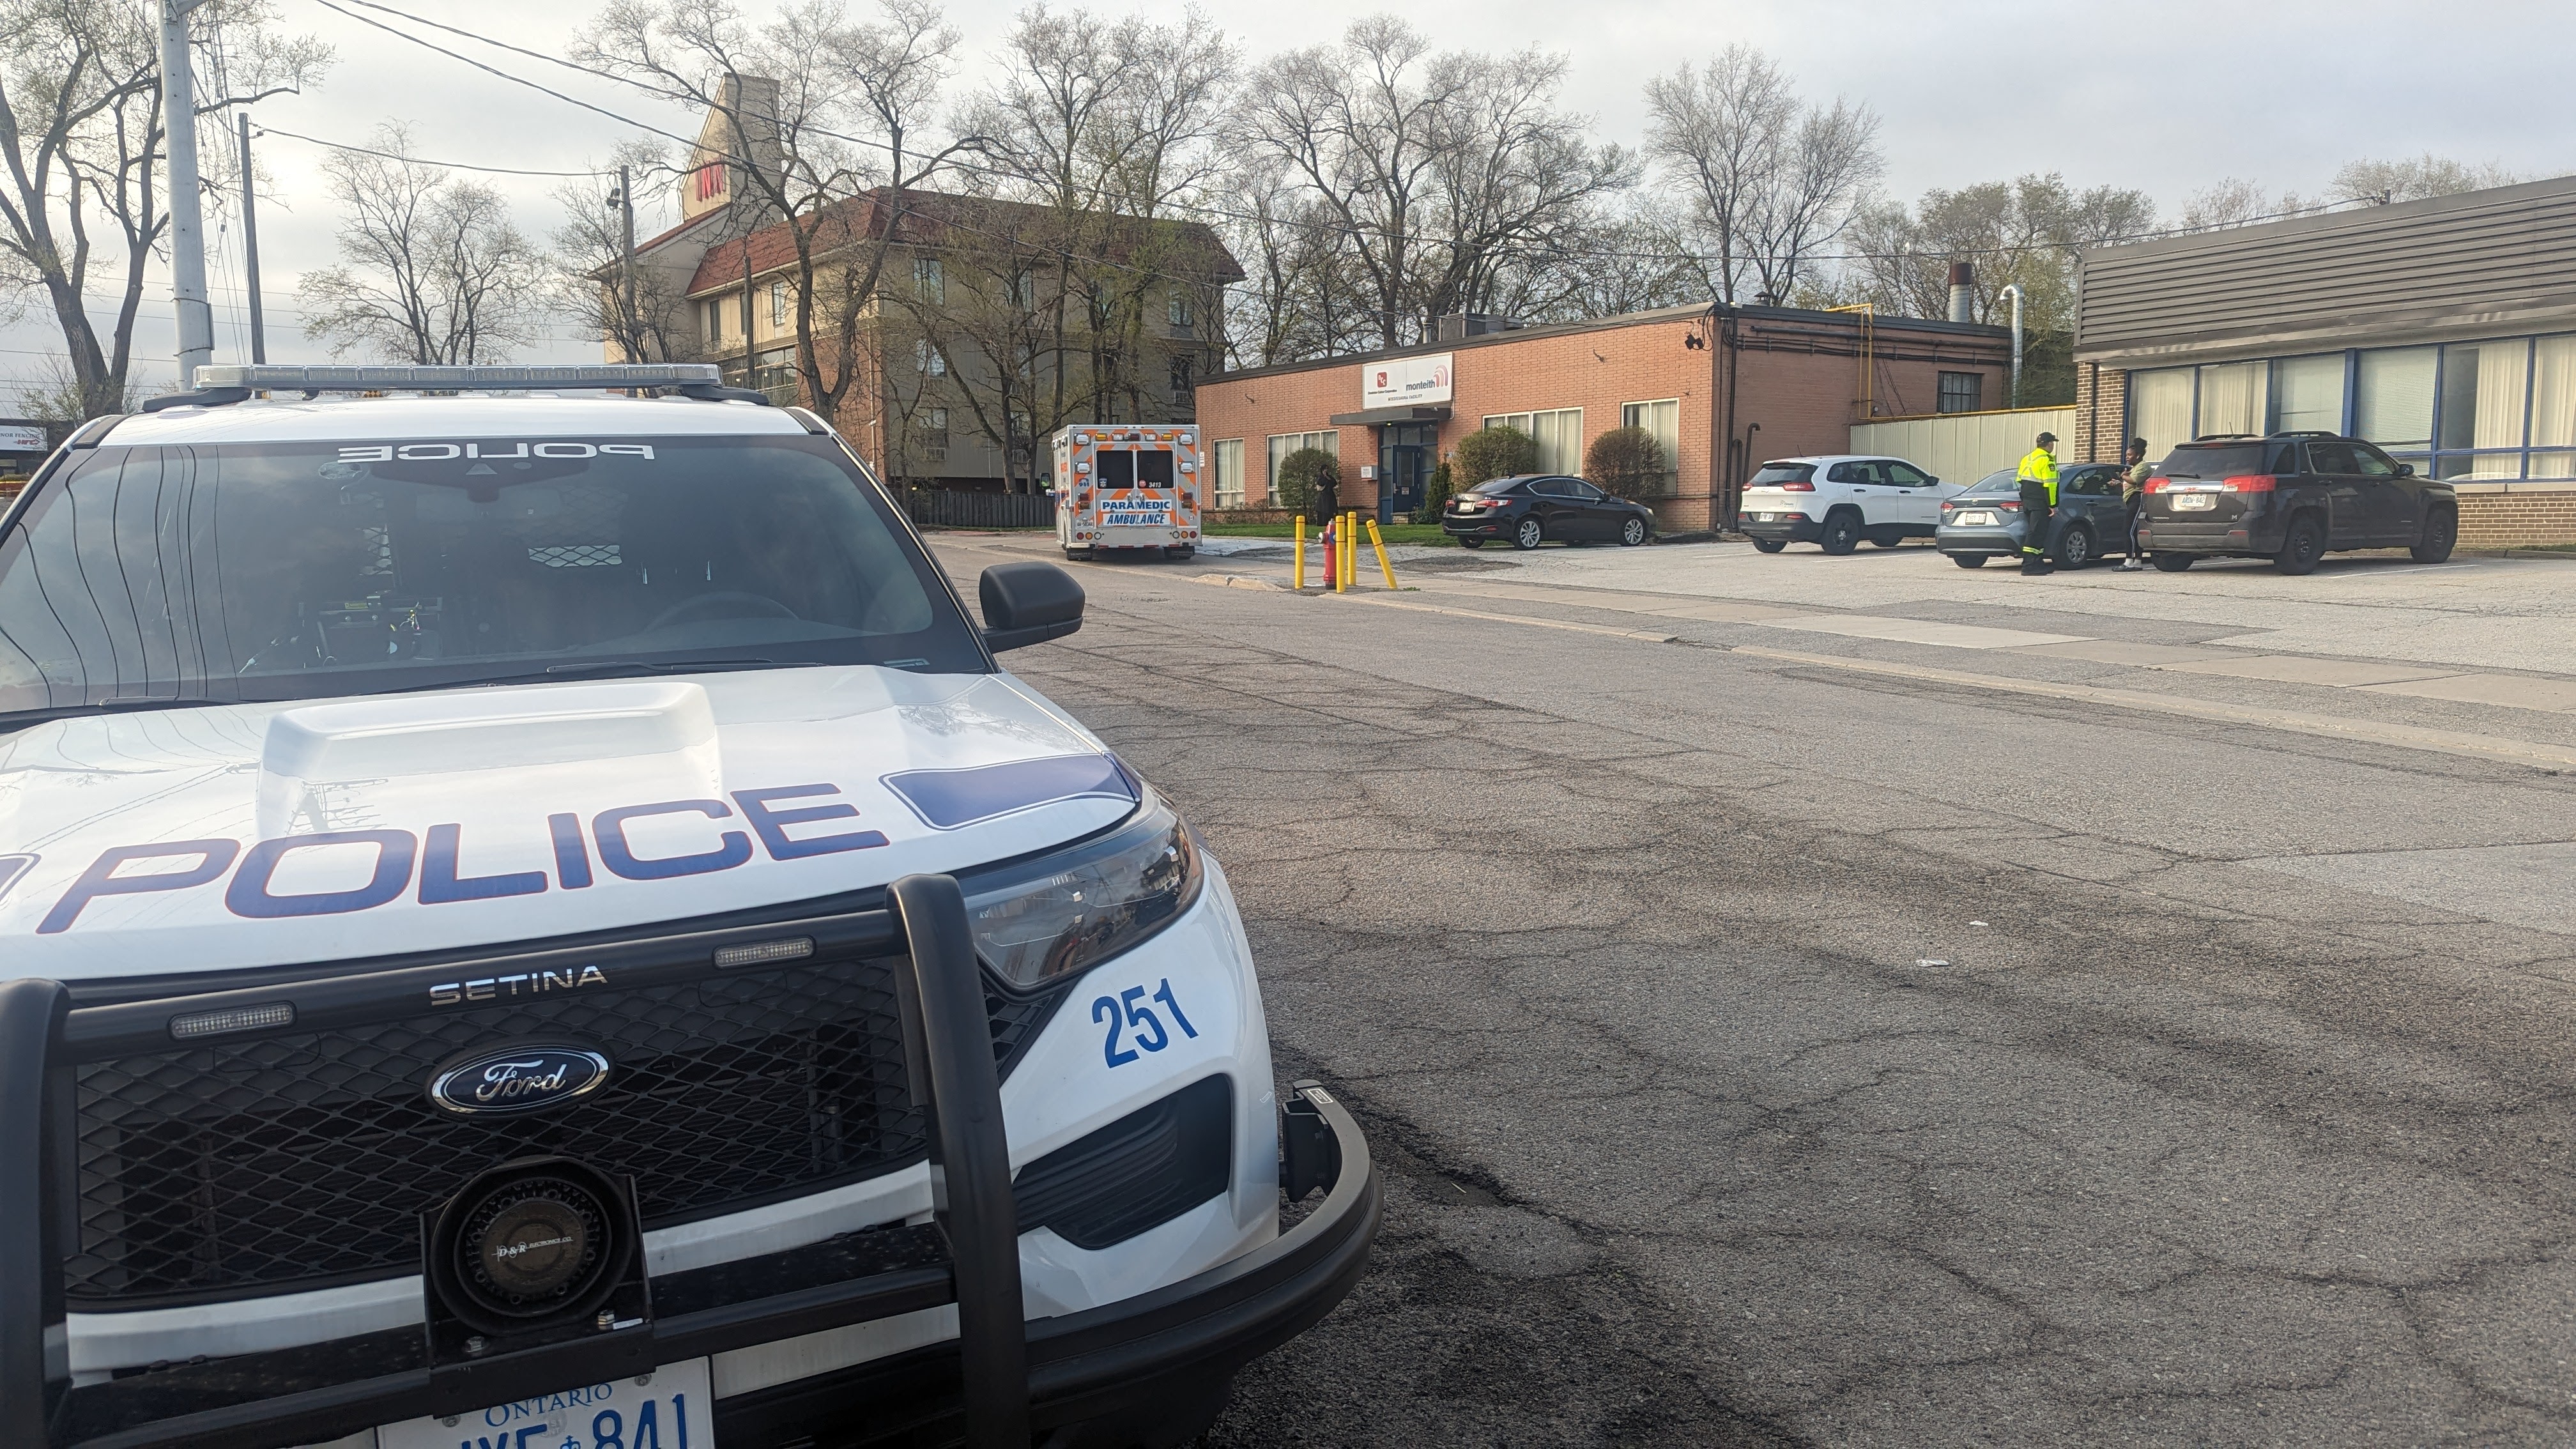 Fatal industrial incident in Mississauga referred to Ministry of Labour